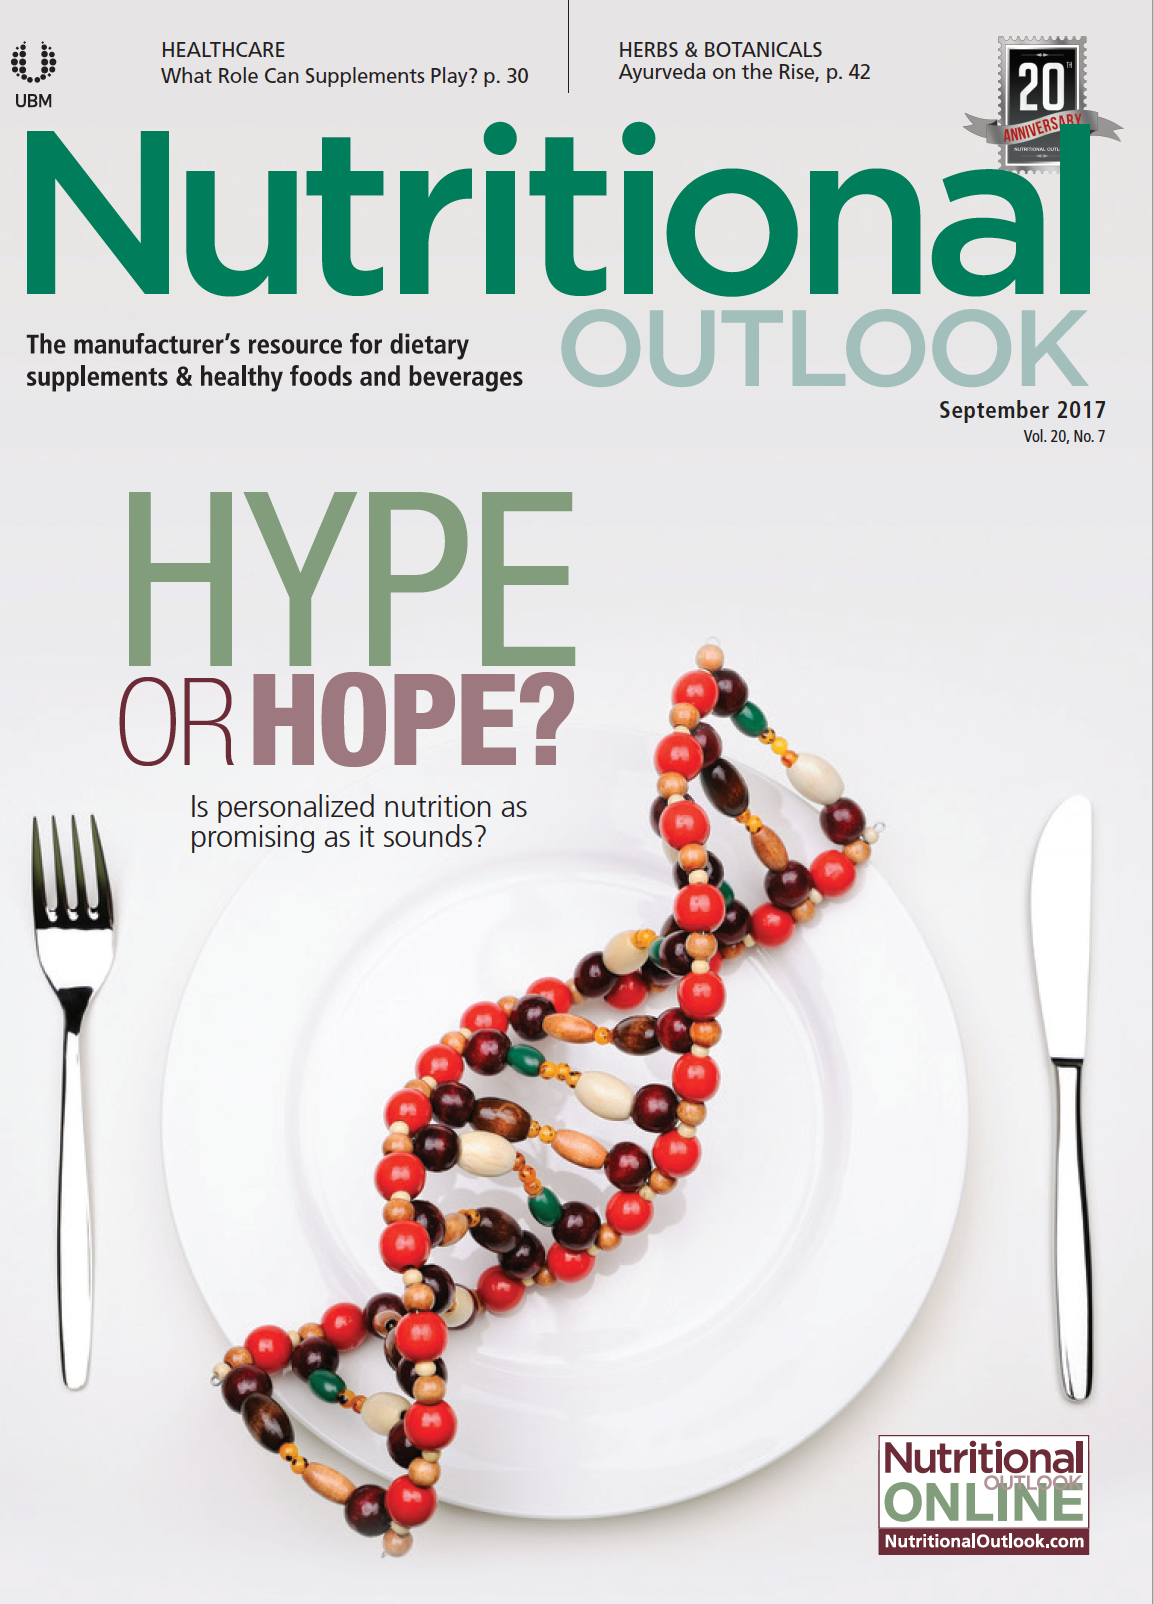 Nutritional Outlook Vol. 20 No. 7